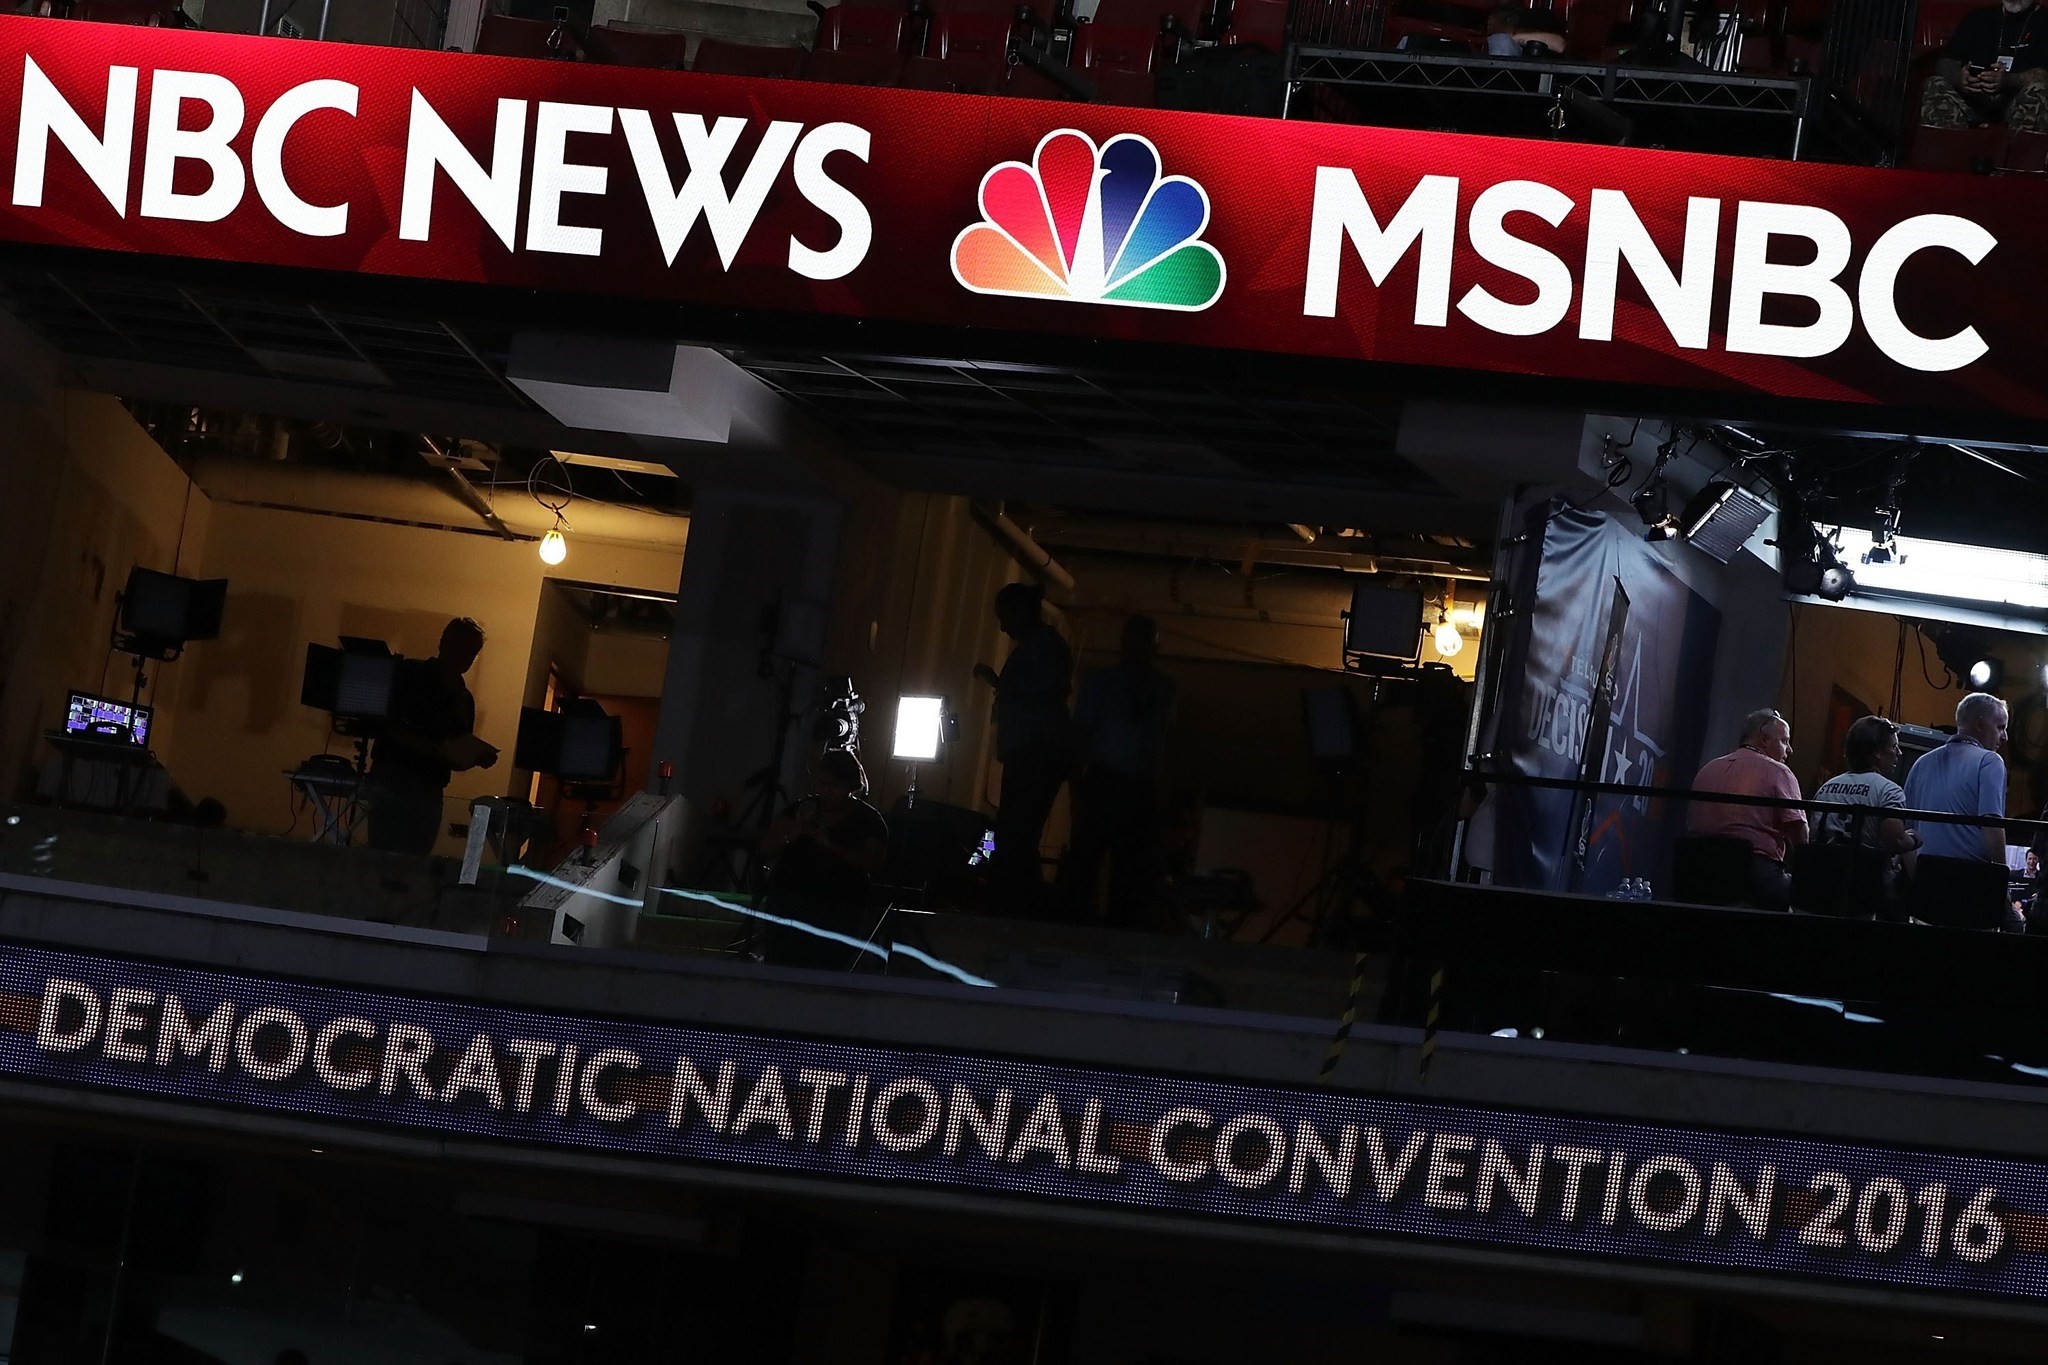 A booth of NBC News and MSNBC is seen at the Wells Fargo Center on July 24, 2016 in Philadelphia, Pennsylvania. (AFP Photo)